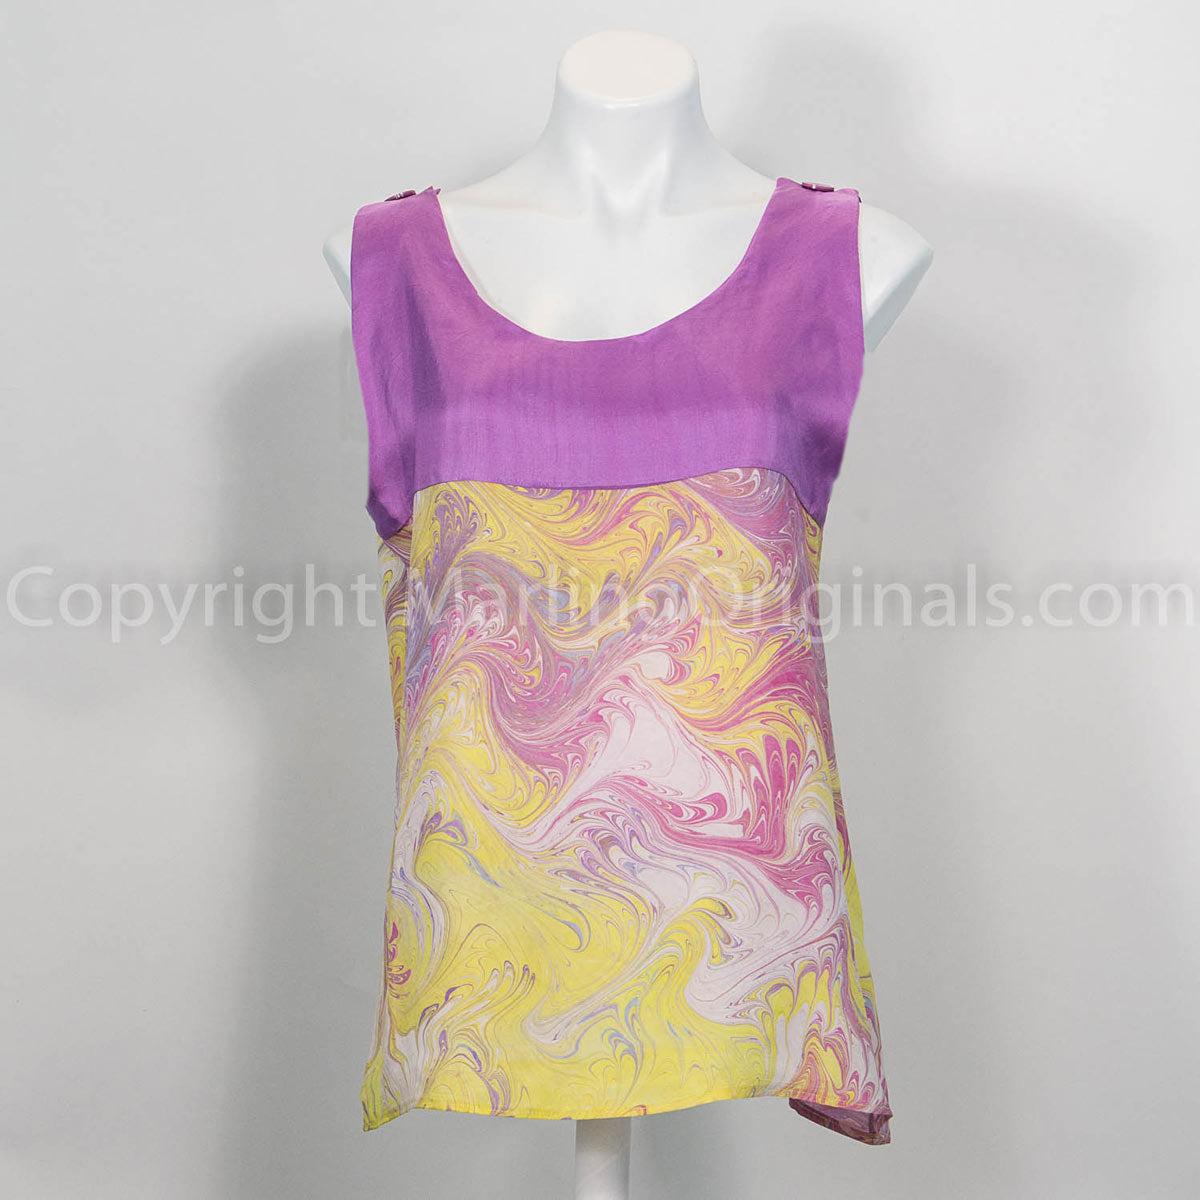 silk tank top features lavender bodice with vivid marbled body.  Yellow, pink, lavender